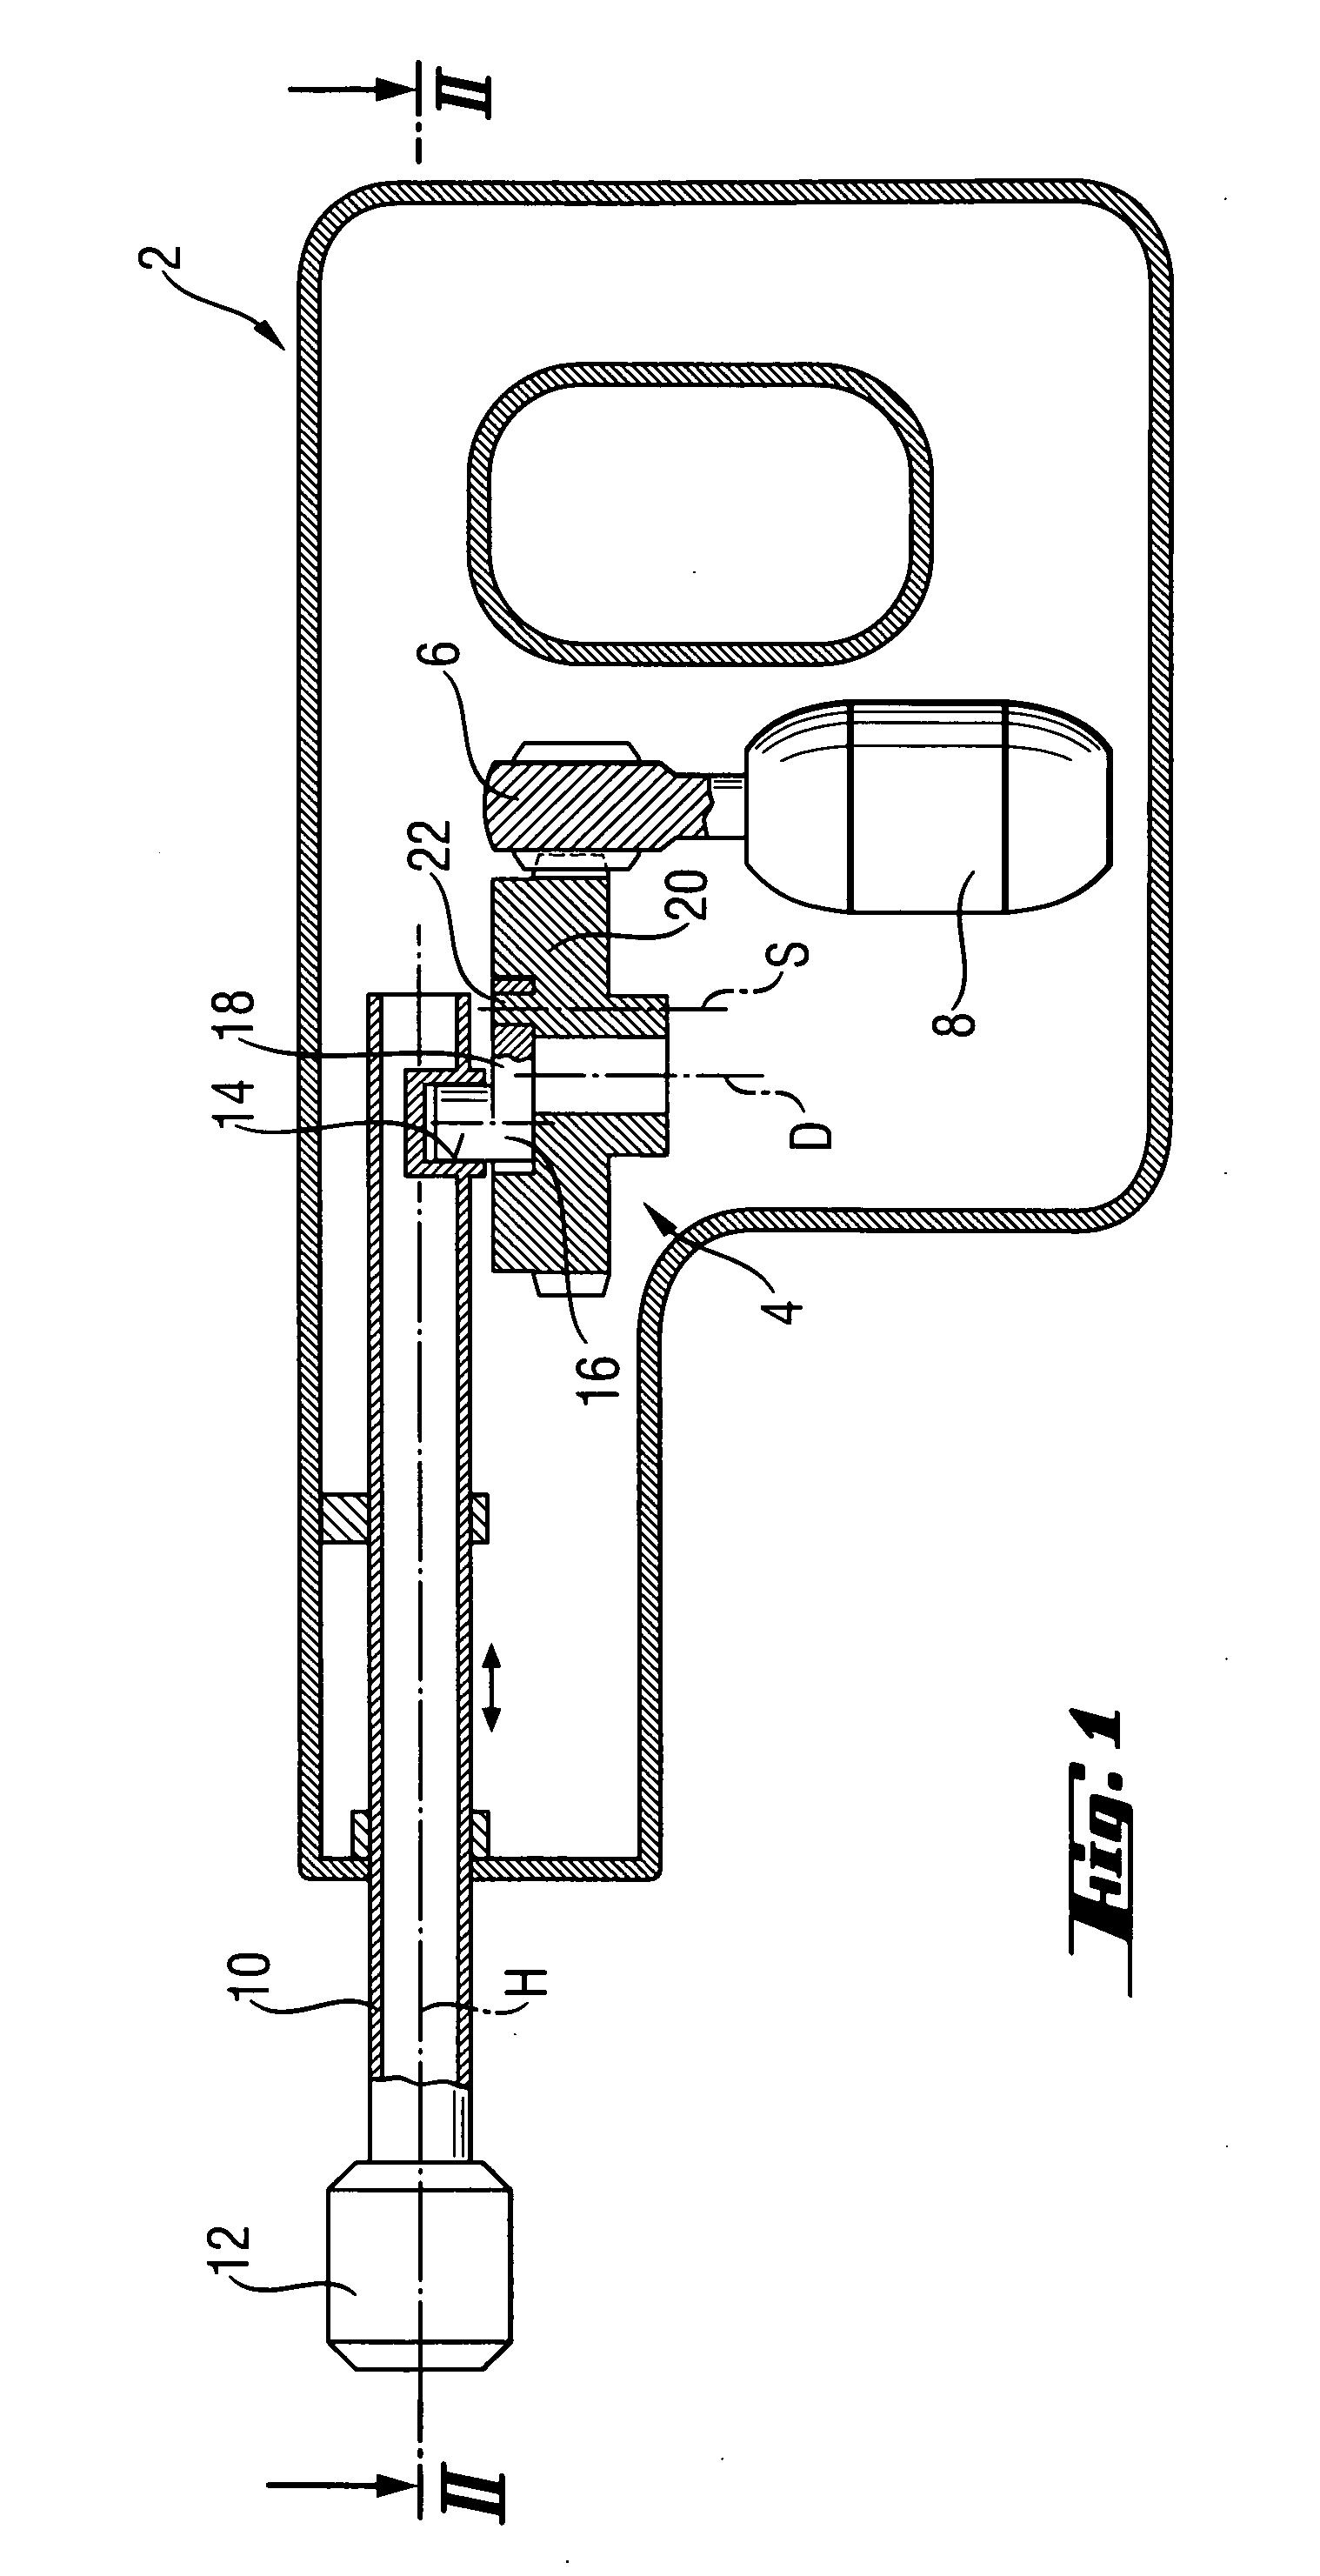 Movement conversion device for a hand-held power tool